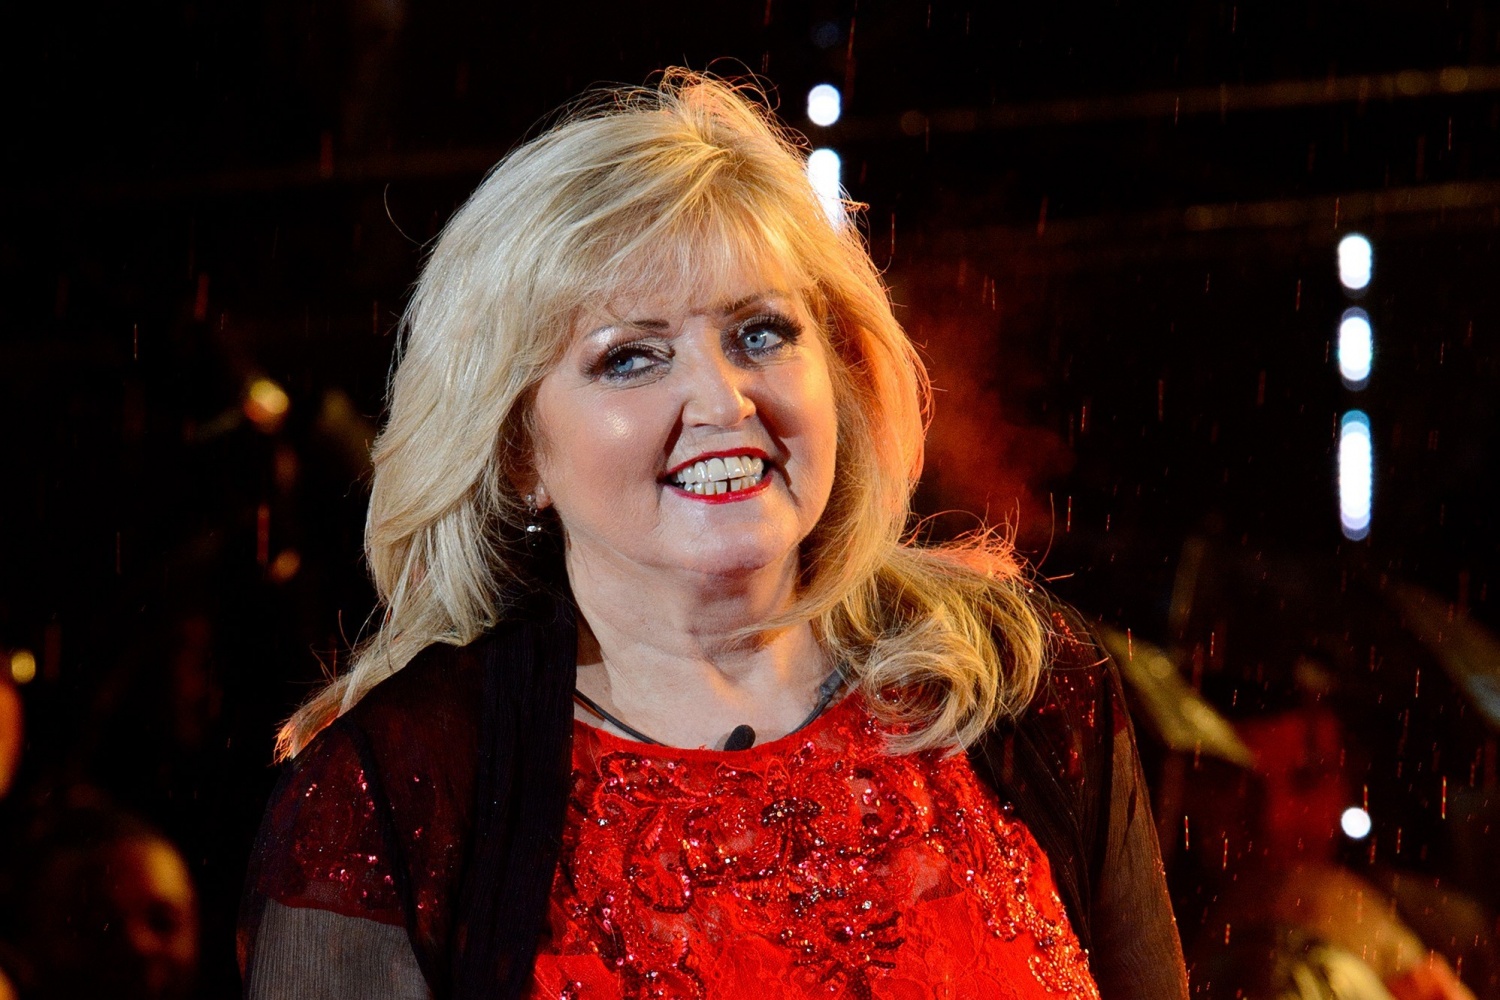 Linda Nolan's Final Days Approaching? Singer Fears She Only Has 1 Christmas Left